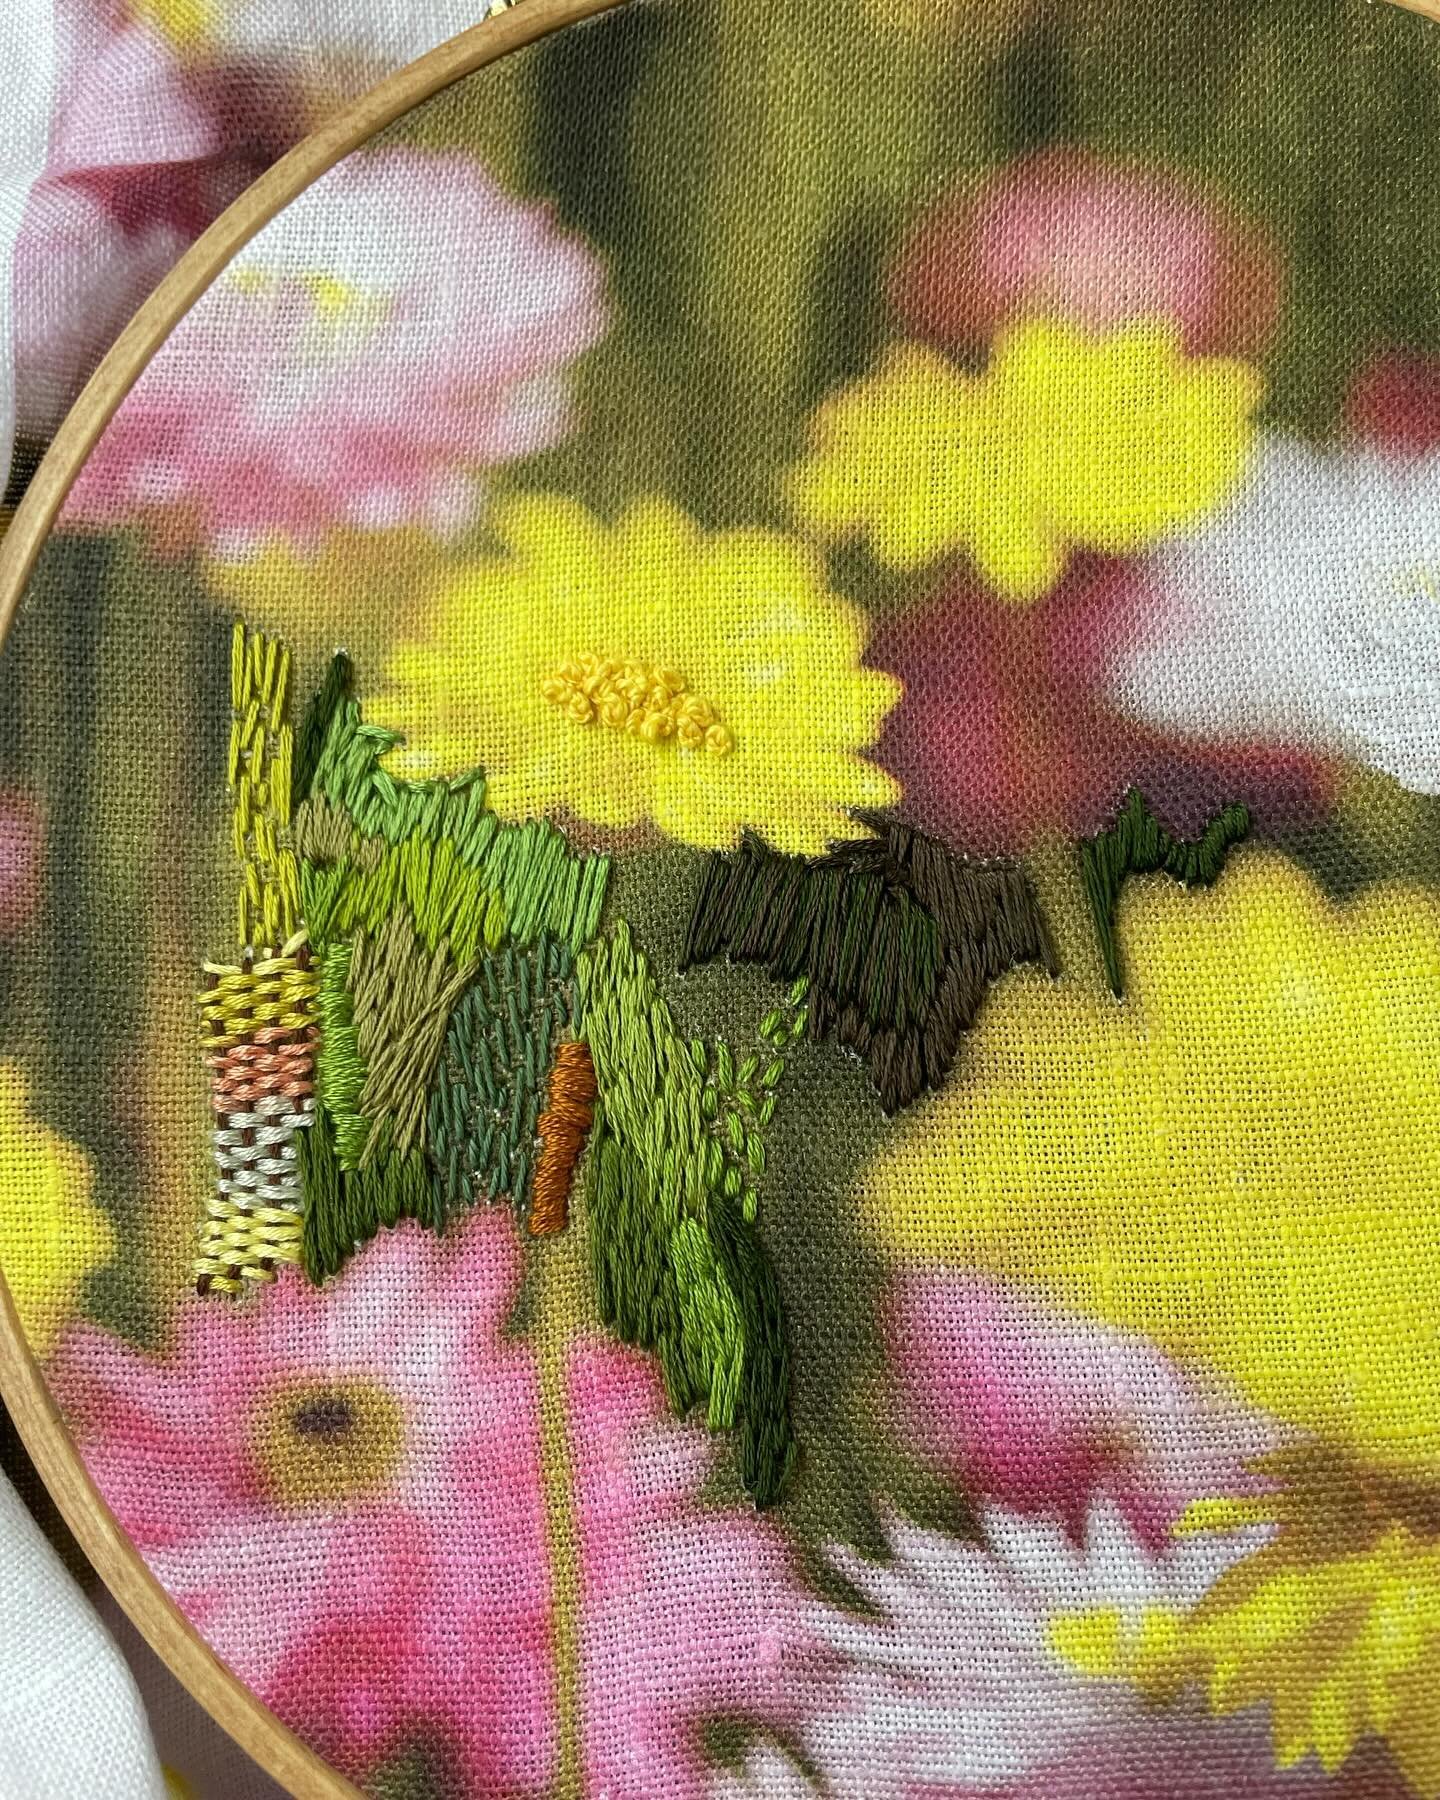 Starting my final piece for Alissa&rsquo;s and my upcoming exhibition &ldquo;Forests &amp; Foreshores&rdquo; at The Corner Gallery in Stanmore, Sydney, 16-21 May. 

This is a collaborative piece where I am stitching (in my style) Alissa&rsquo;s beaut